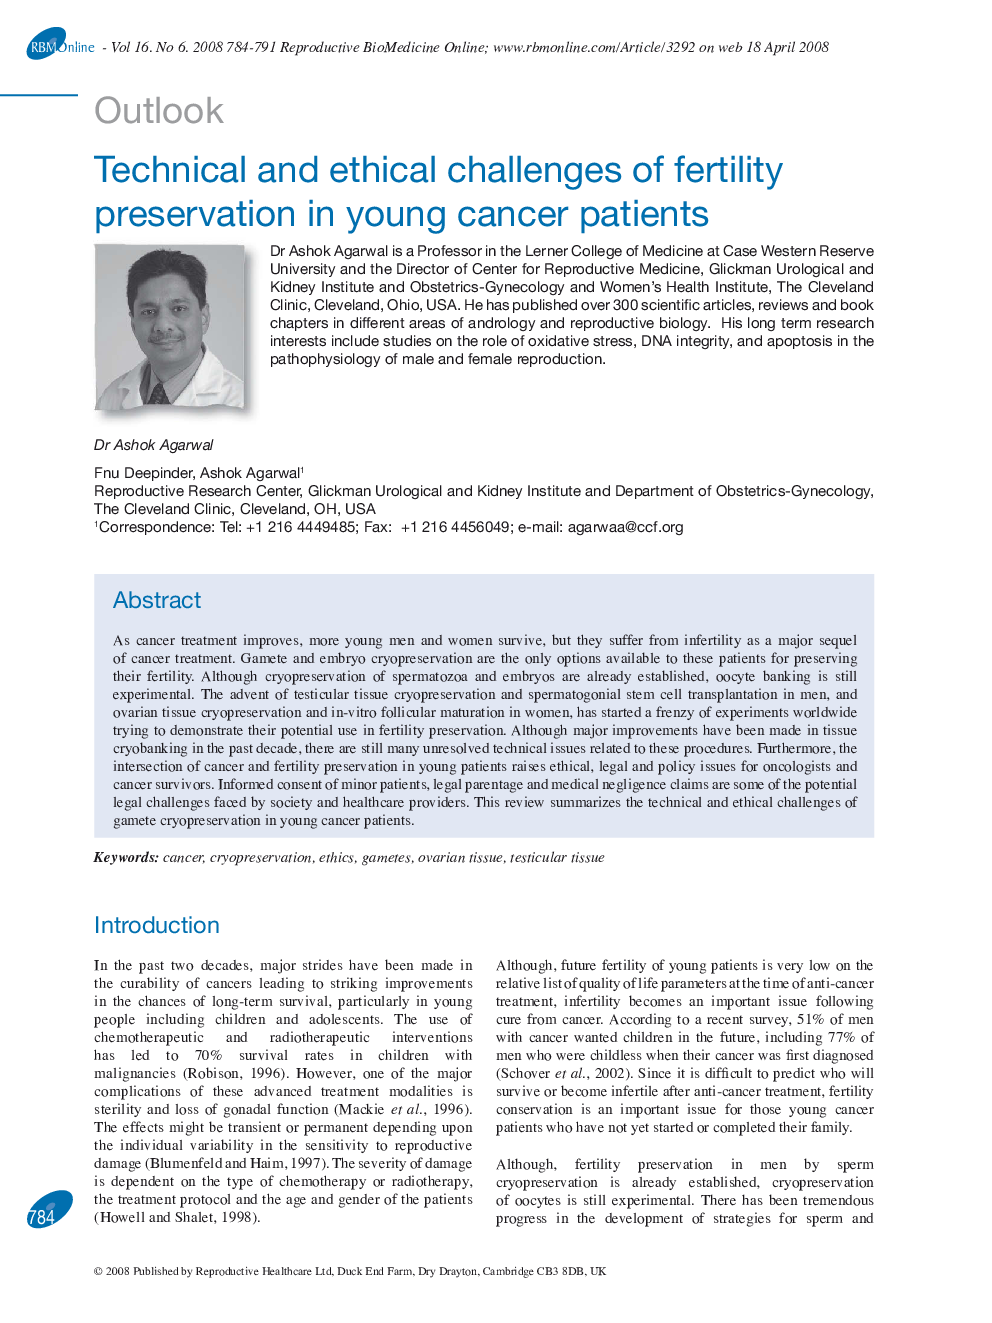 Technical and ethical challenges of fertility preservation in young cancer patients